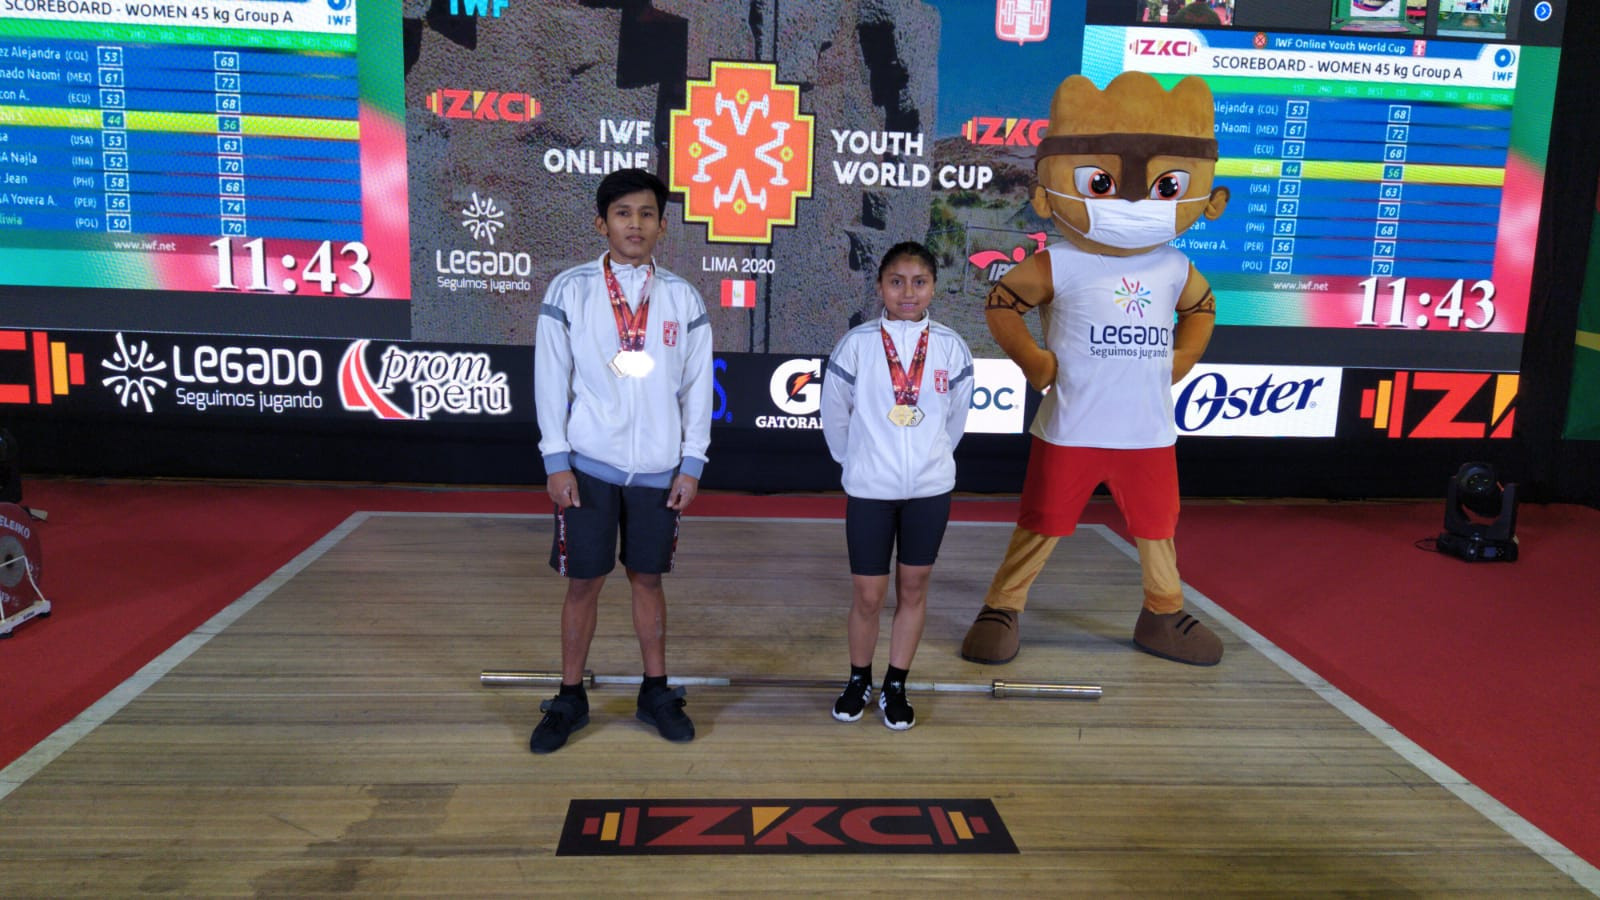 Organisers Peru top medal table on day one of IWF Online Youth World Cup